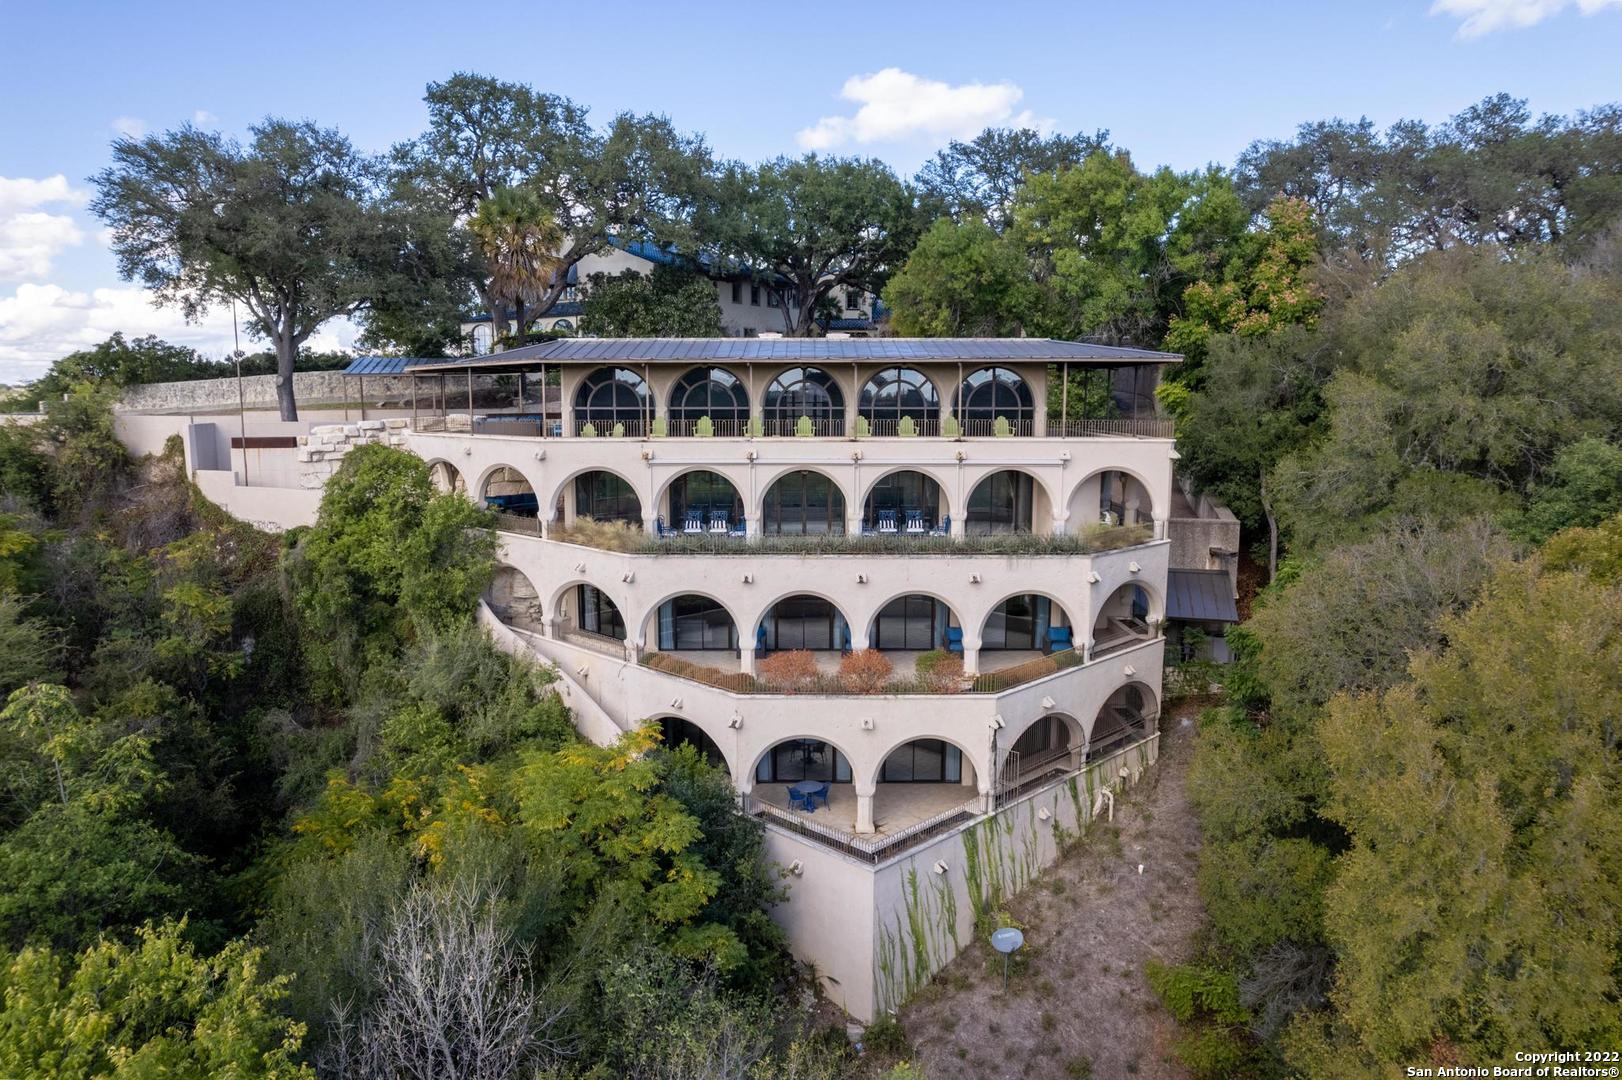 Iconic Alamo Heights home, designed by Tom Pressley and built by Bartlett-Cocke in 1986. This amazing multi-level home features floor-to-ceiling windows with views of the Olmos Dam, Olmos Basin and skyline views of downtown San Antonio.